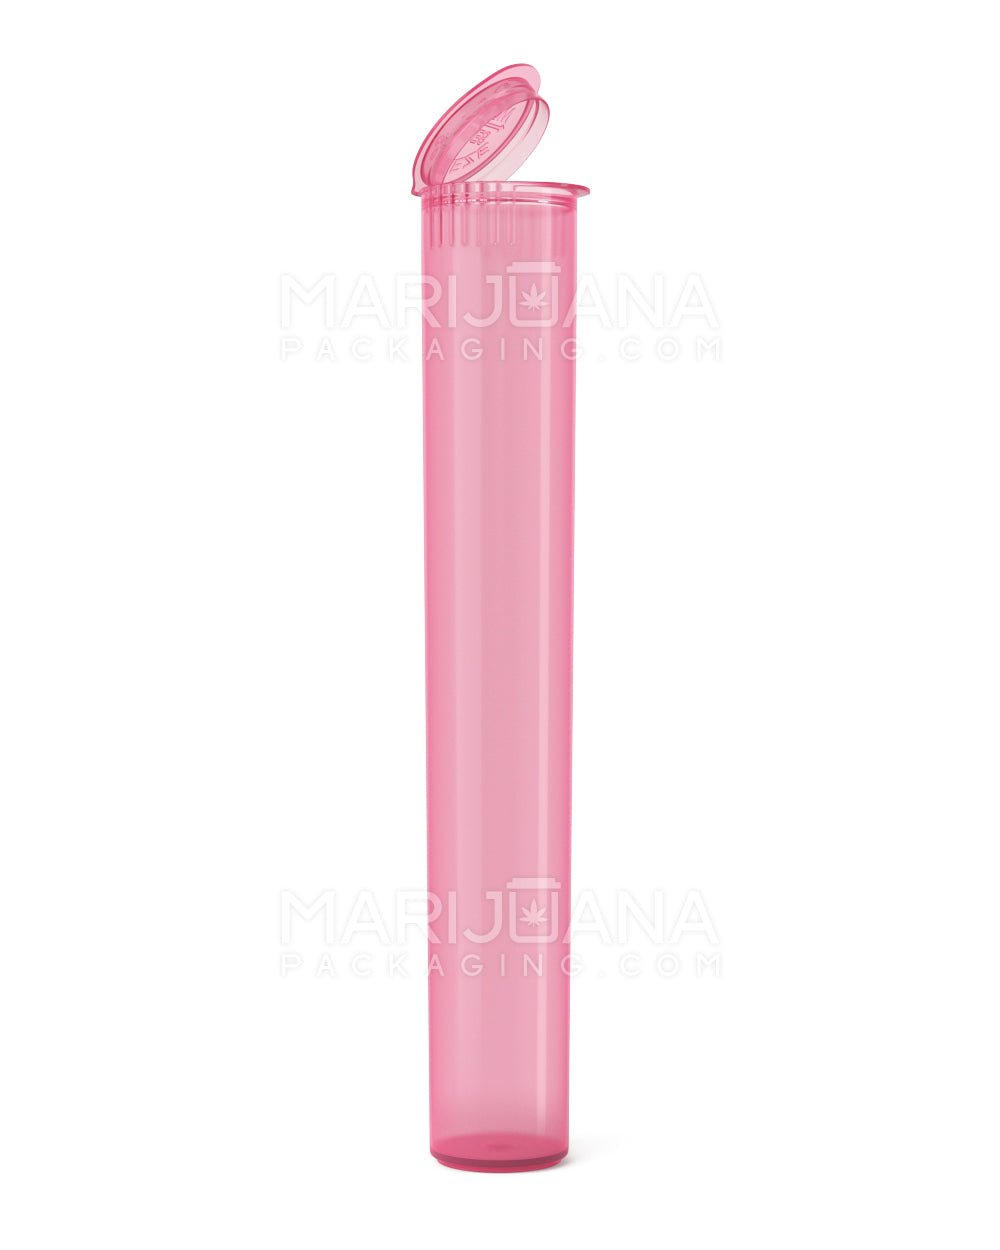 116mm Pink Pop Top Pre Roll Child Resistant Tubes - (500 qty.)